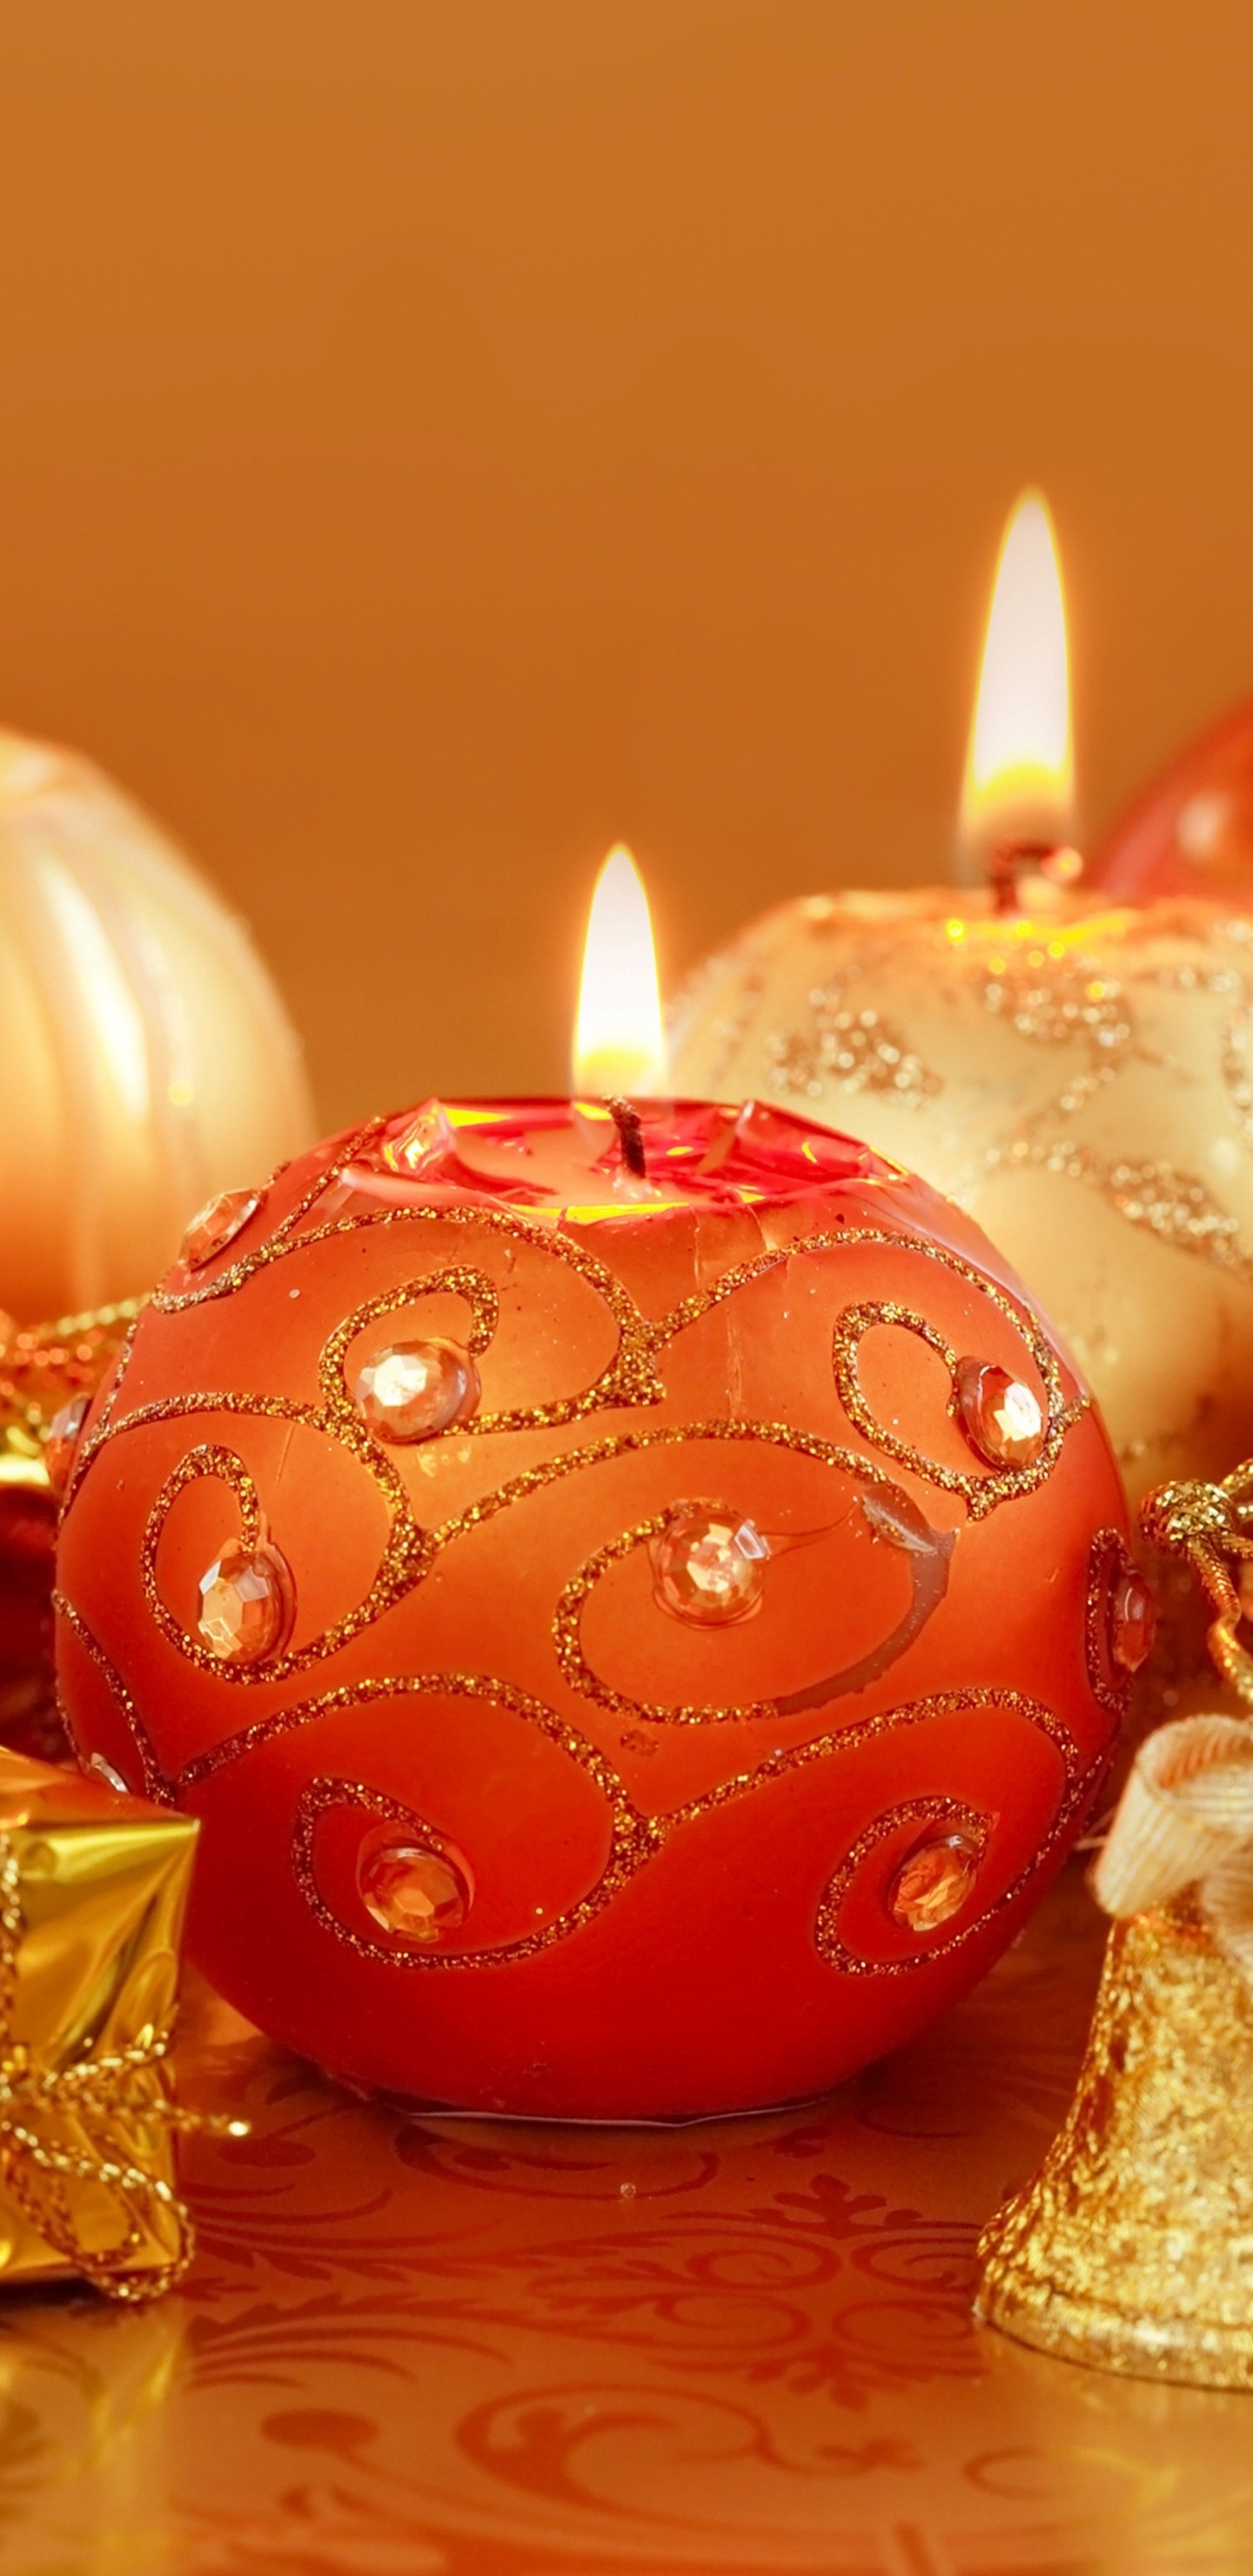 Christmas Day, New Year, Candle, Still Life, Lighting. Wallpaper in 1440x2960 Resolution